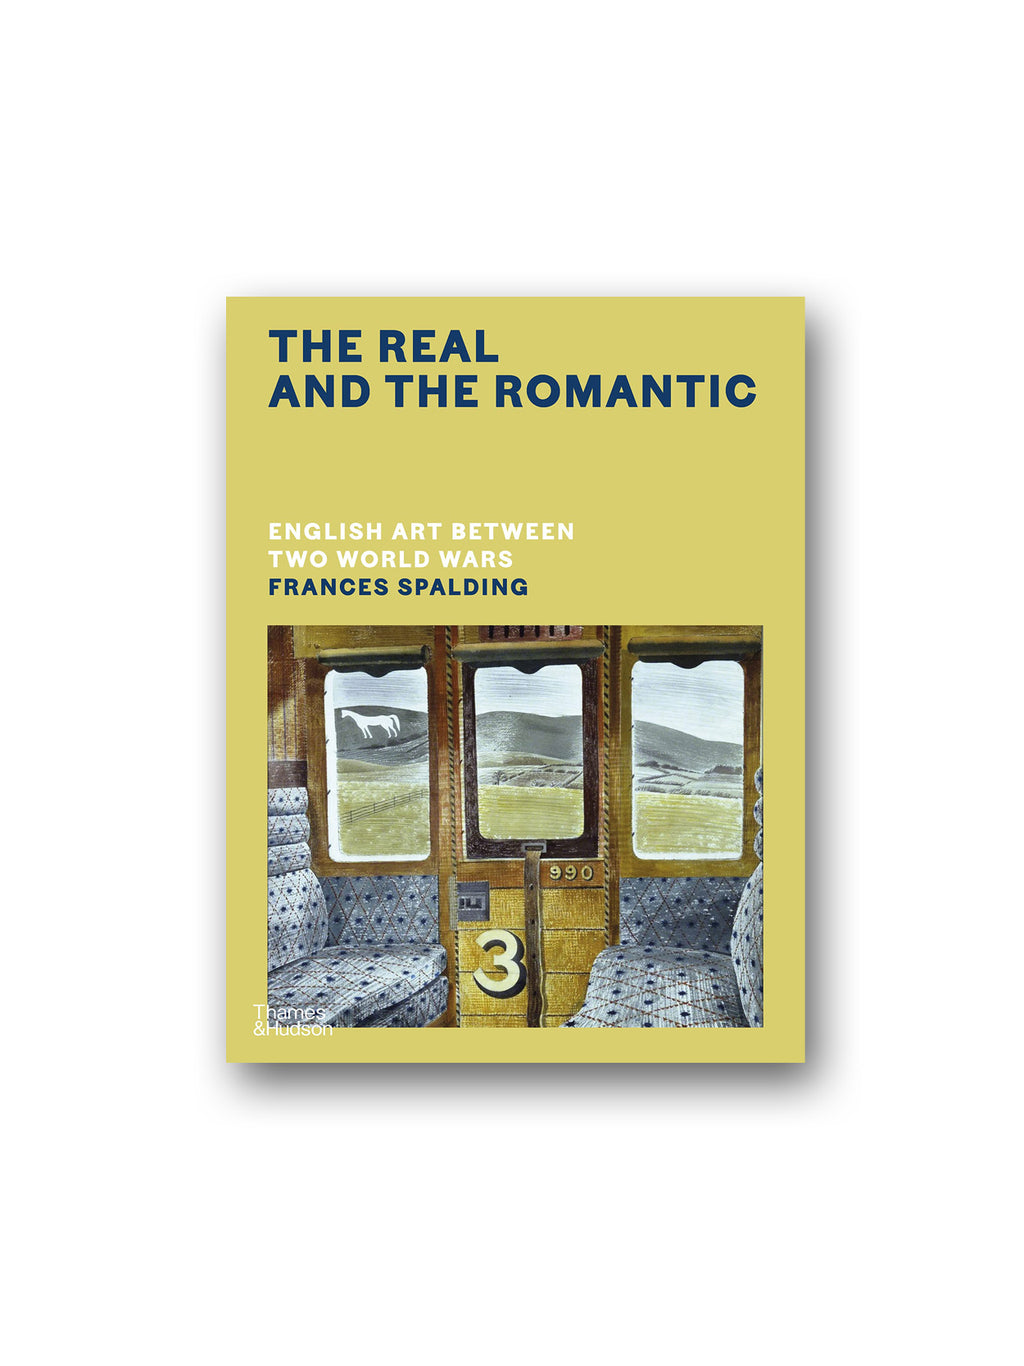 The Real and the Romantic